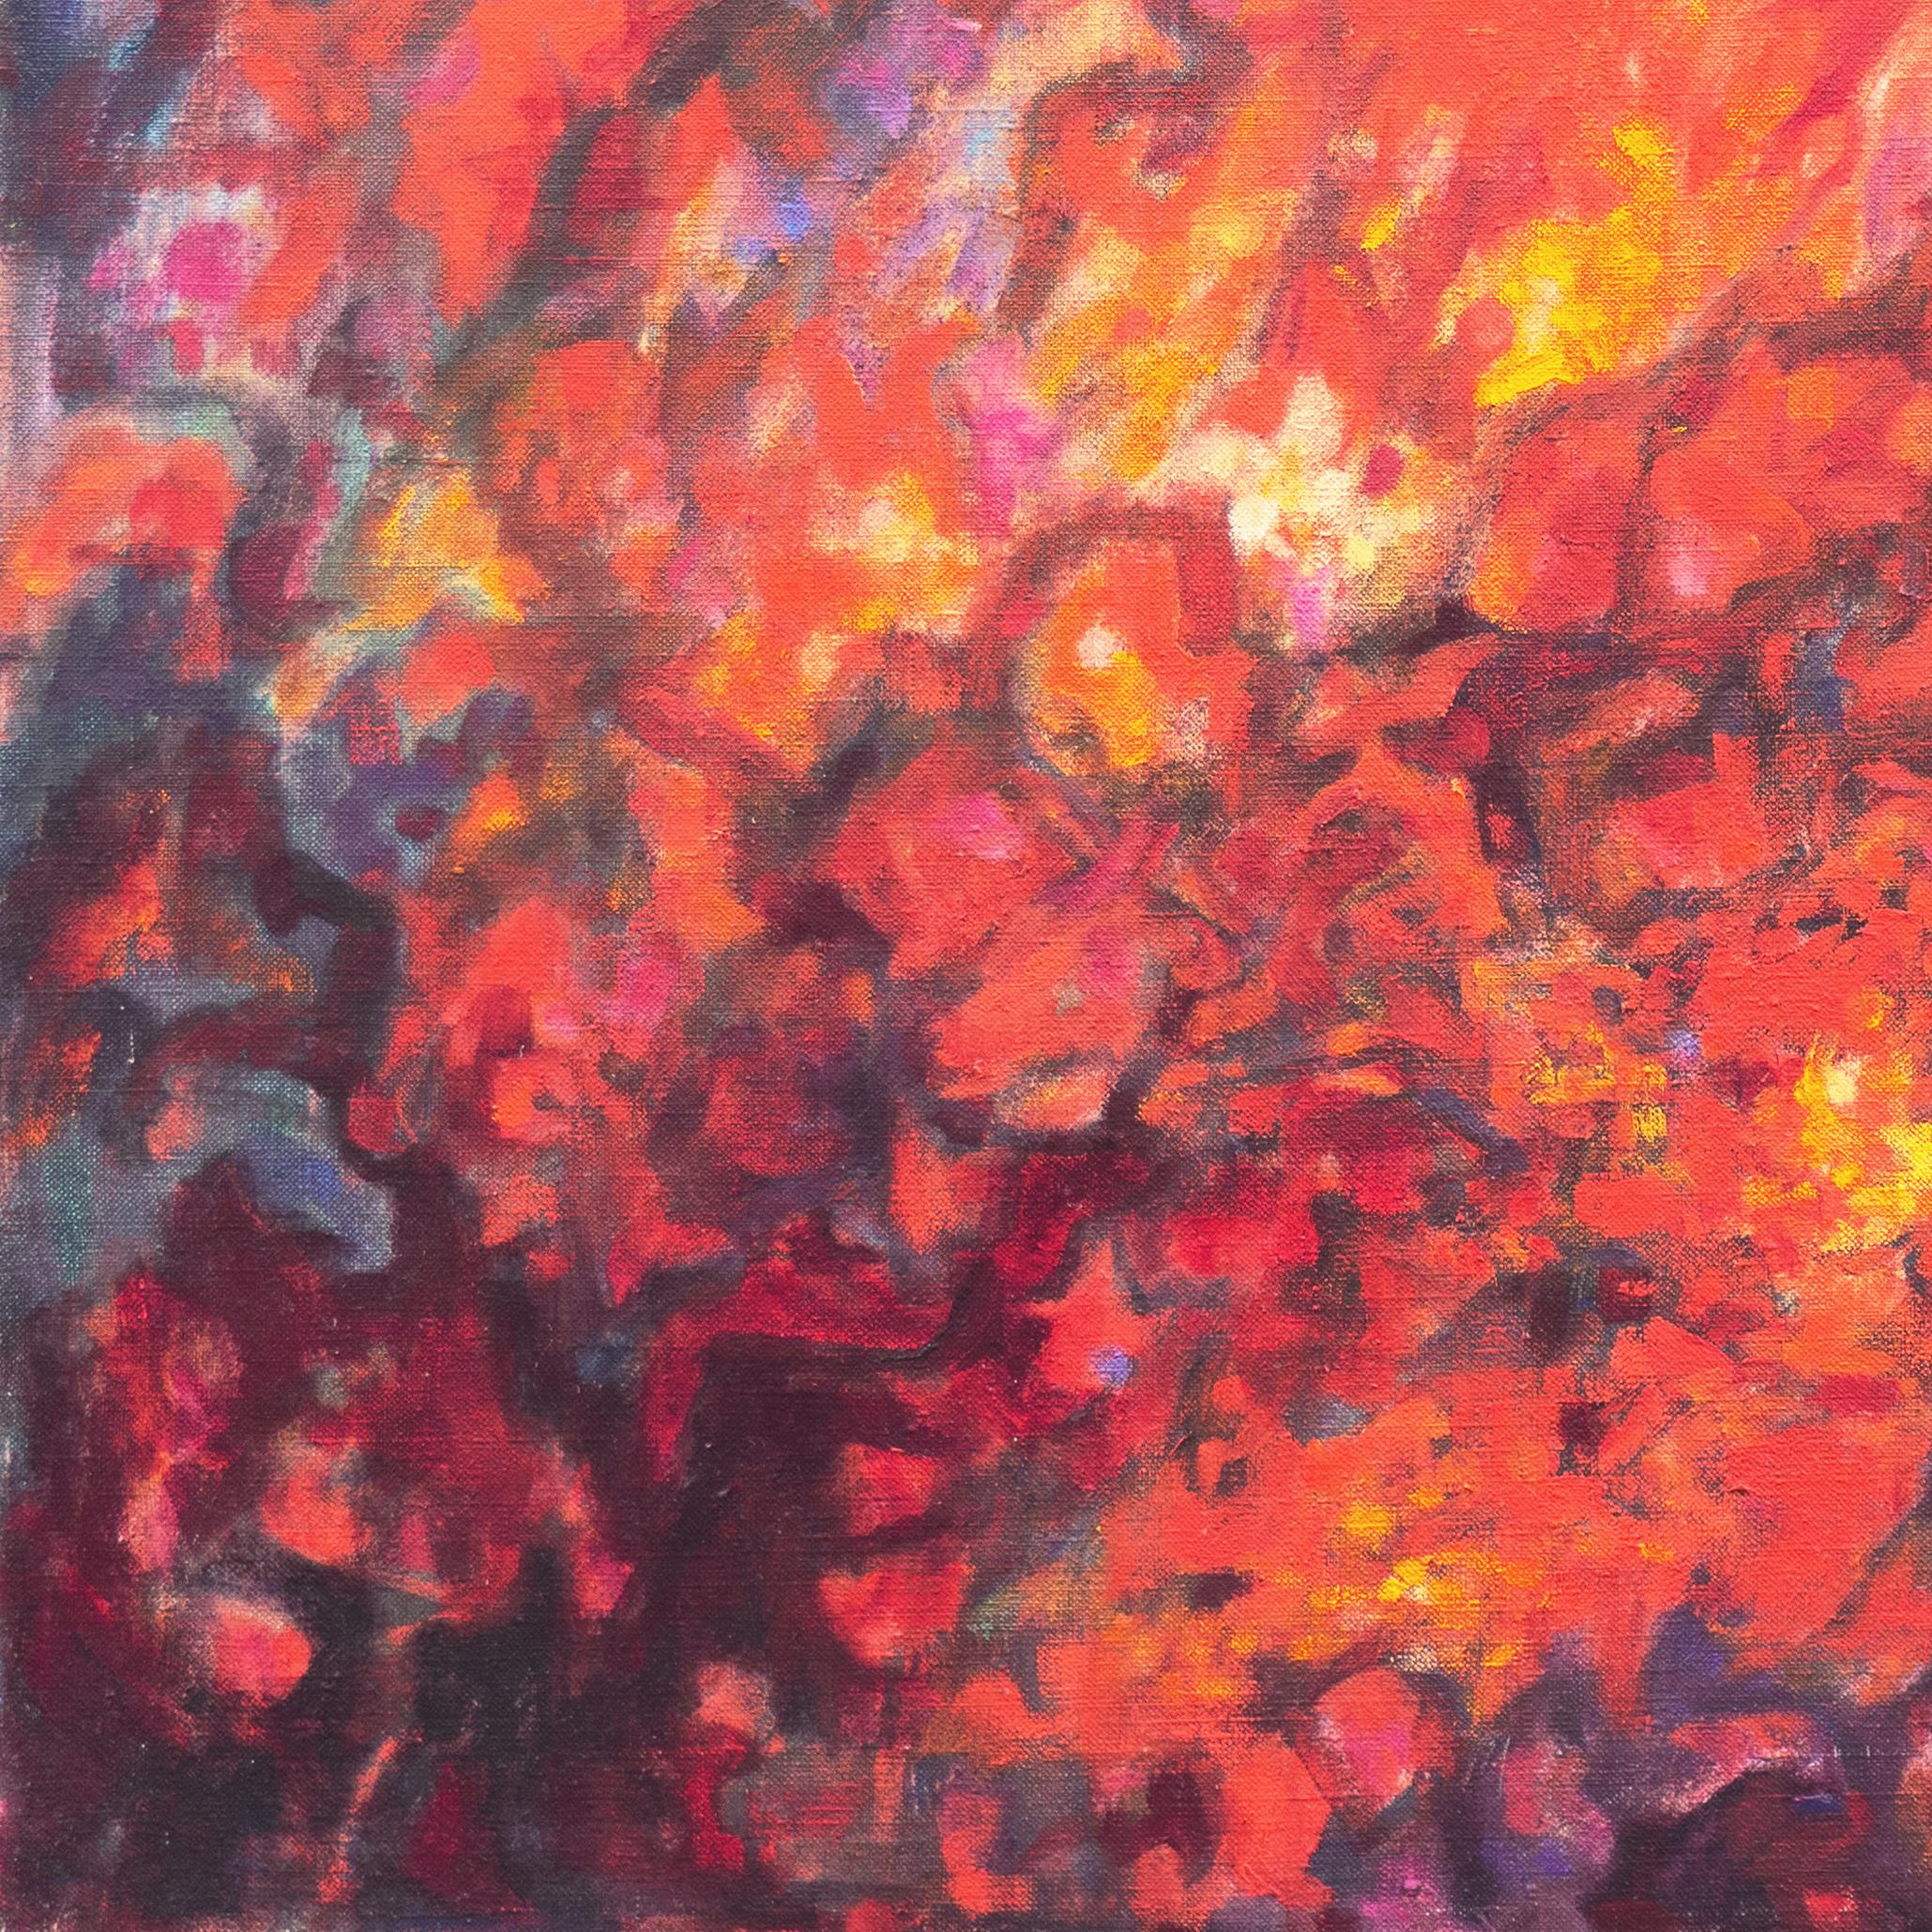 Signed lower right, 'N. Flynn' (American, 20th century) and painted circa 1975.

A large and turbulent oil abstract showing a conflagration of hot colors contrasted against an aubergine background.